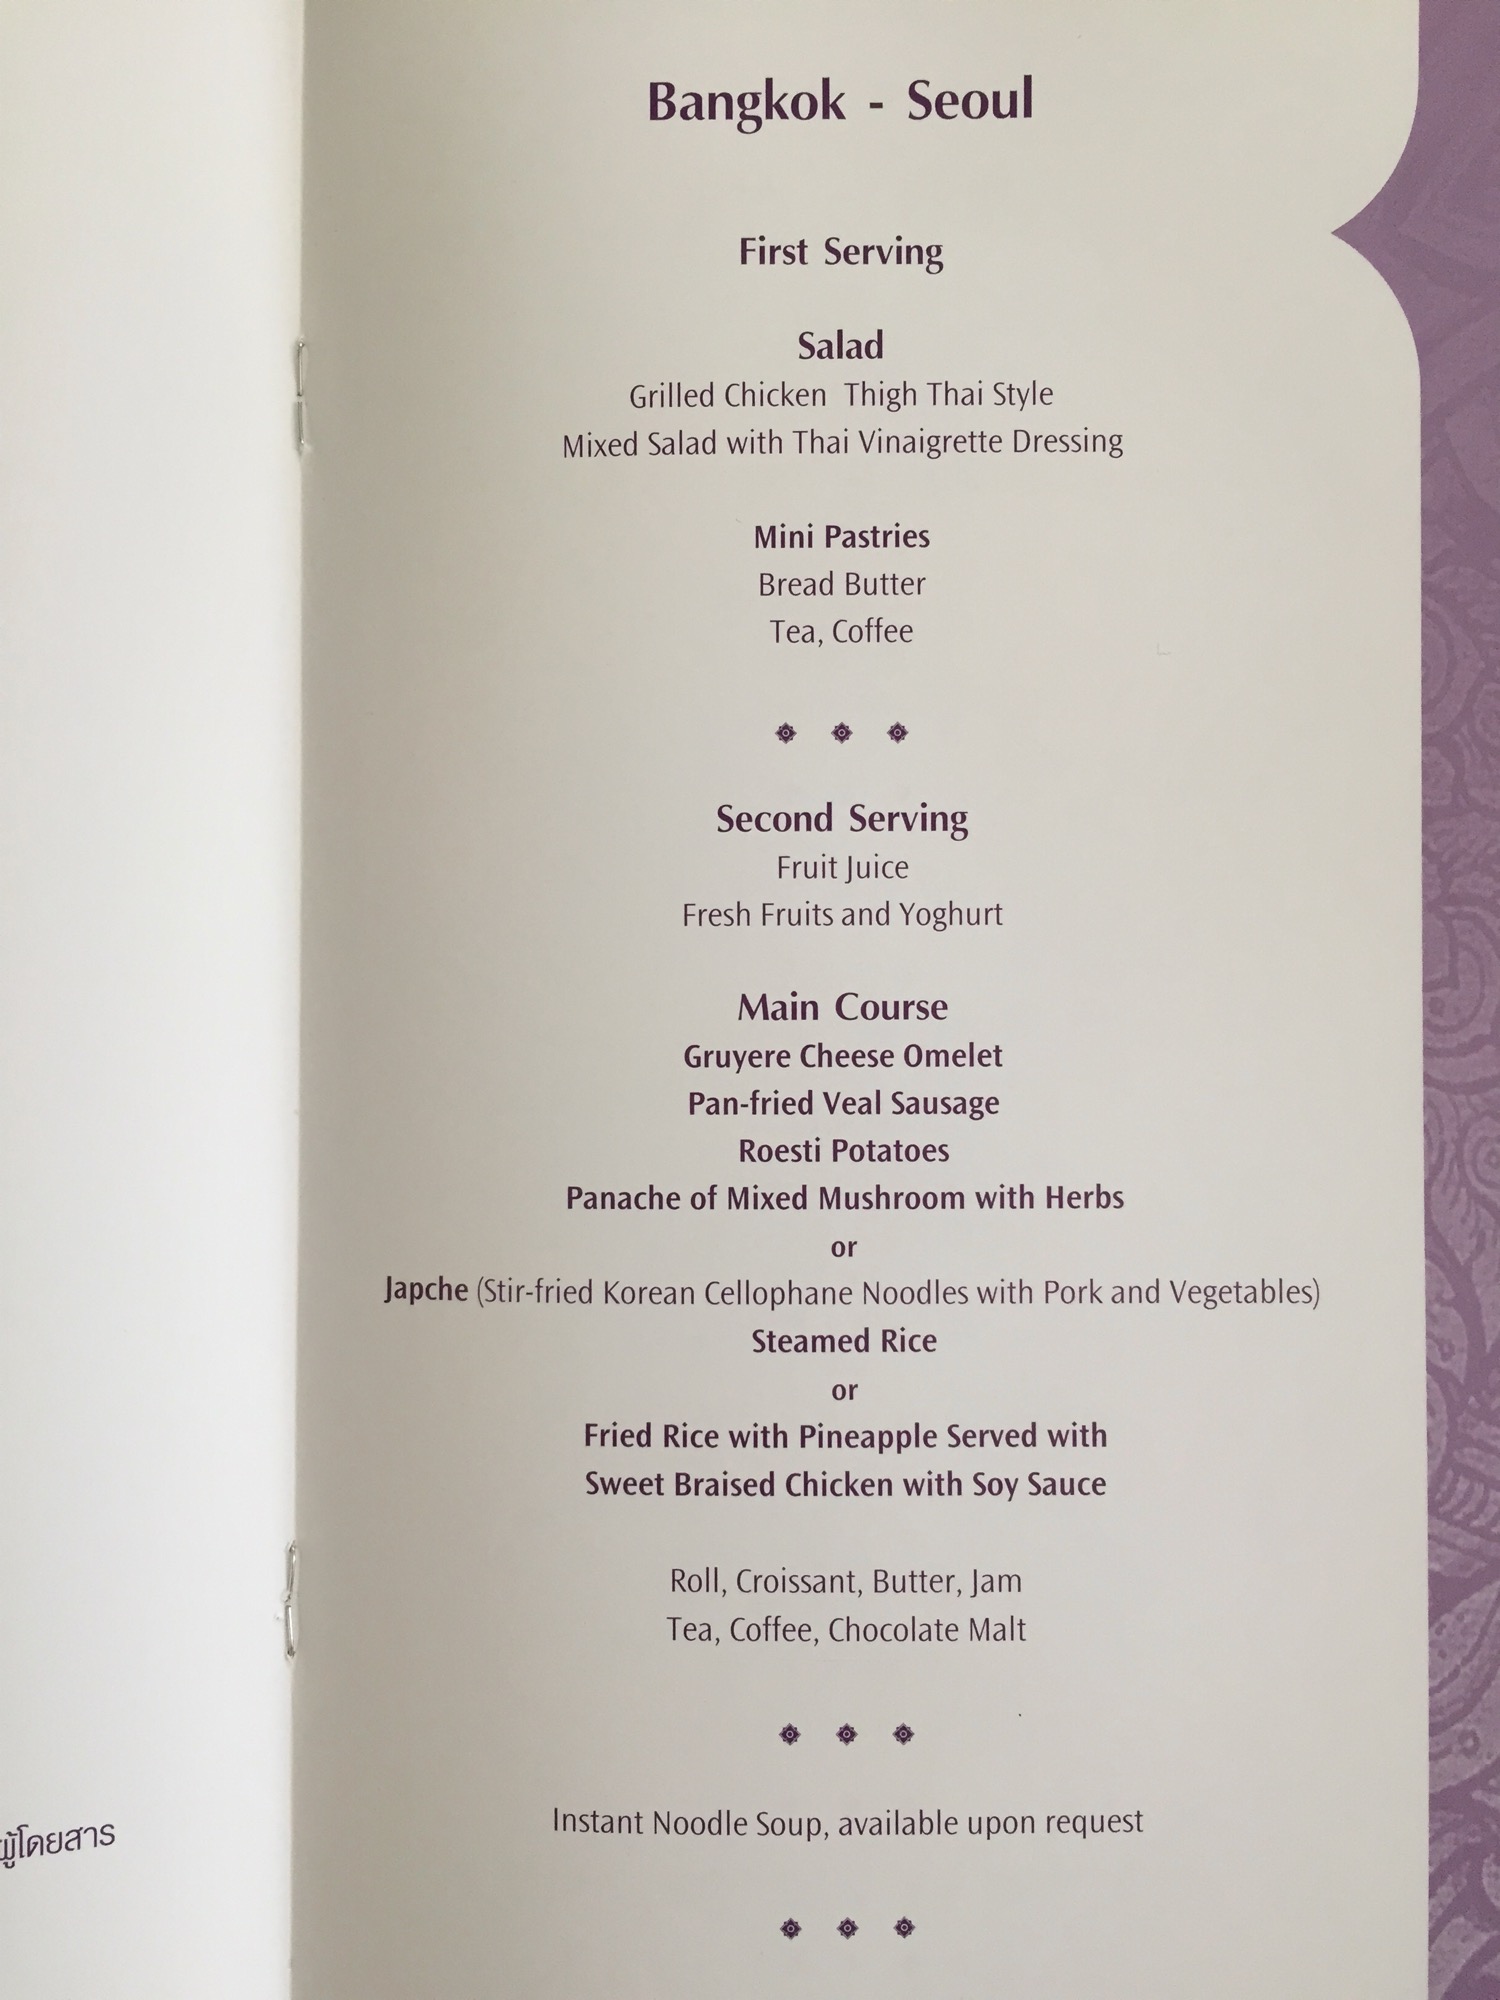 a menu with text in a book